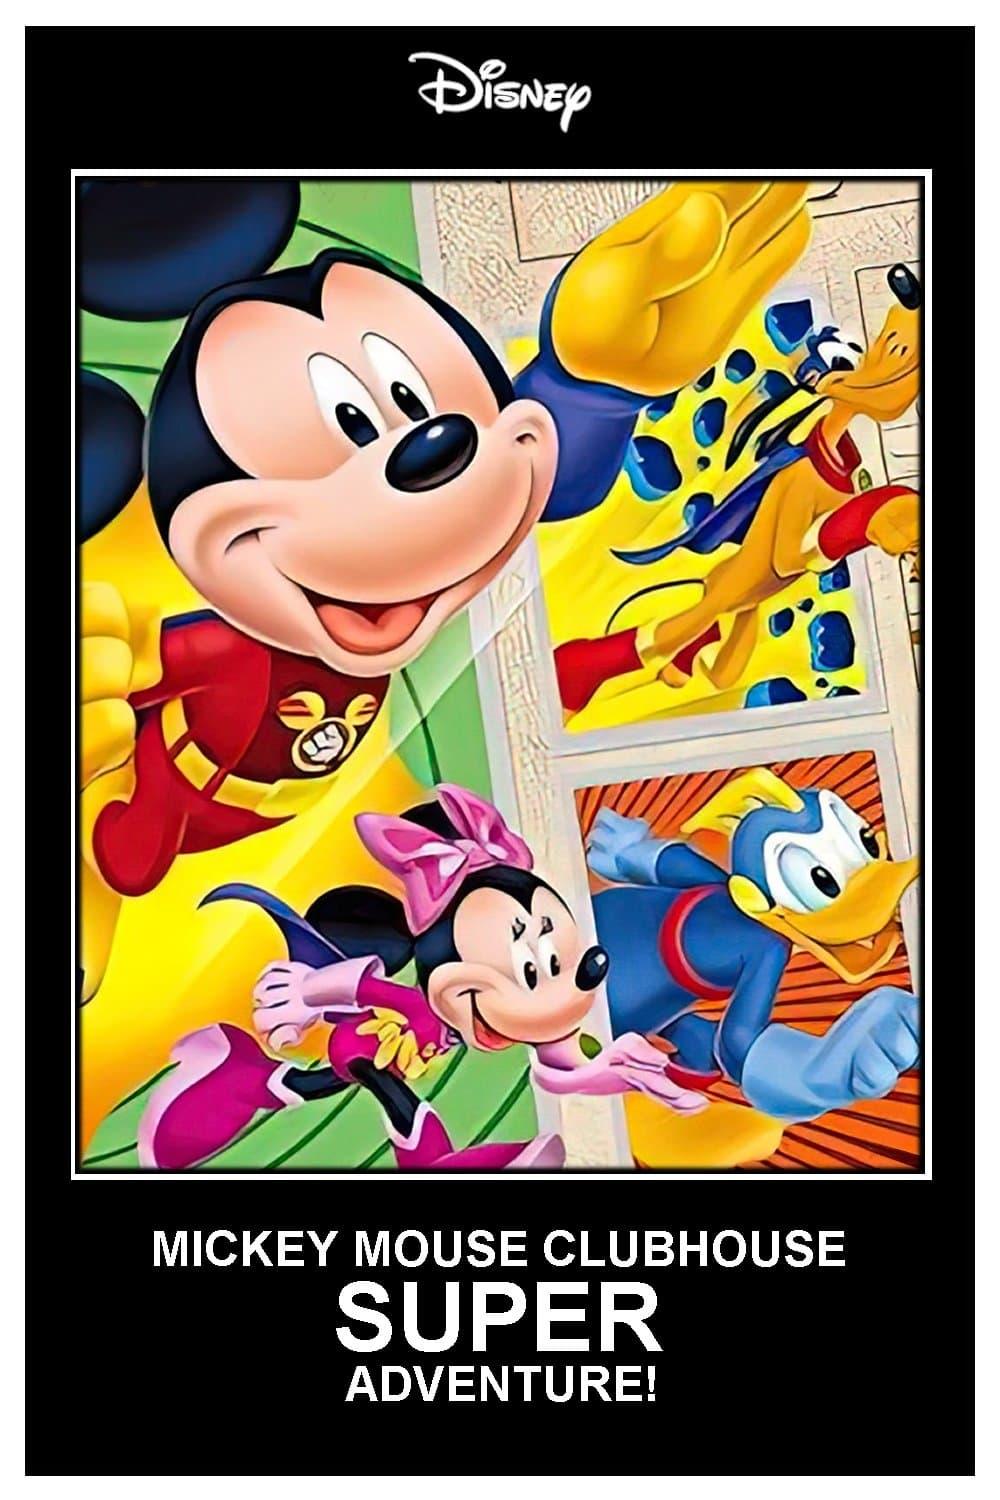 Mickey Mouse Clubhouse: Super Adventure! poster